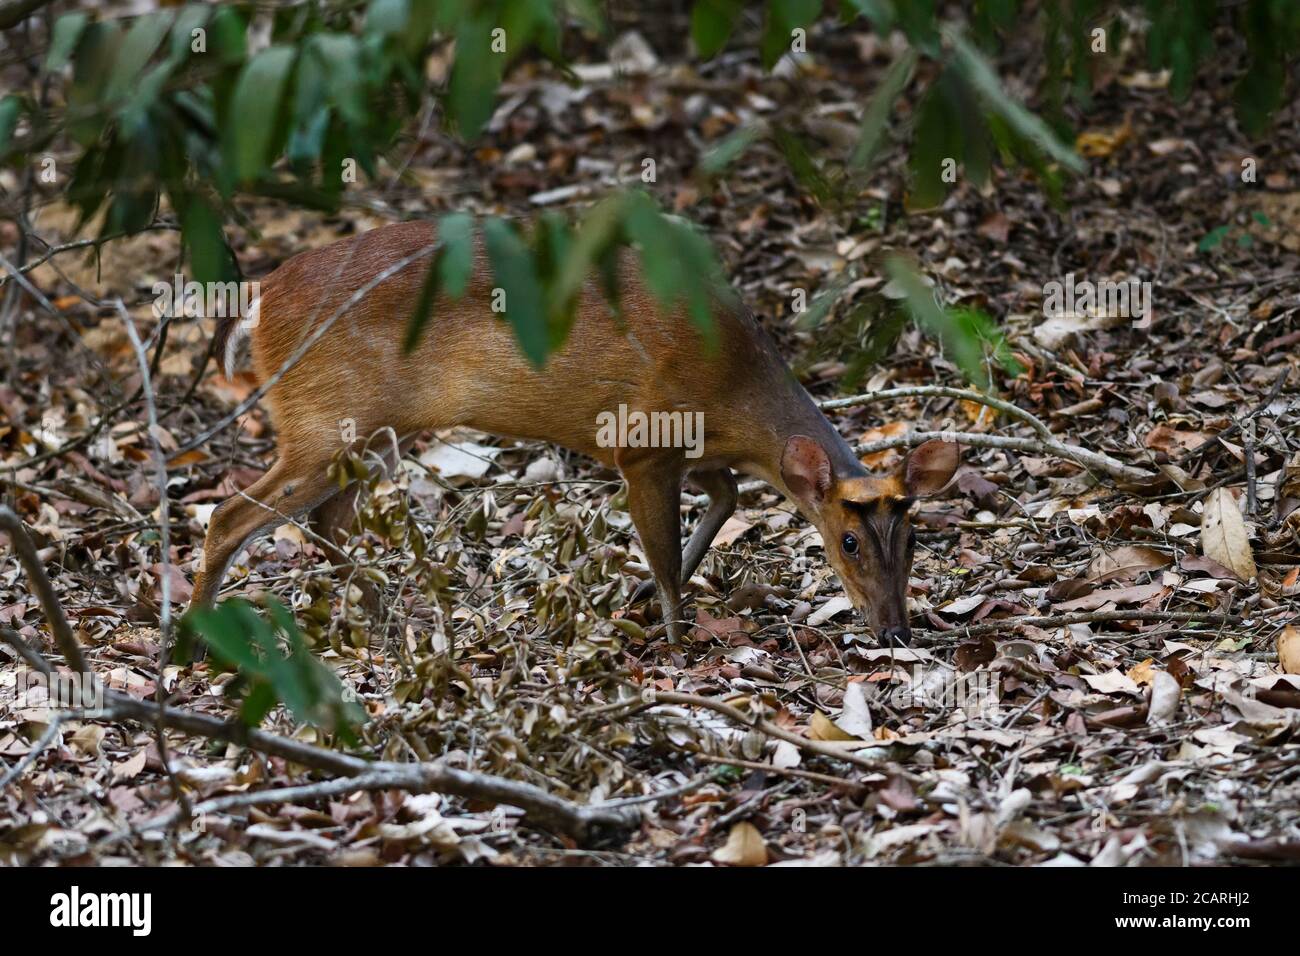 Southern Red Muntjac - Muntiacus muntjak, beatiful small forest deer from Southeast Asian forests and woodlands, Sri Lanka. Stock Photo